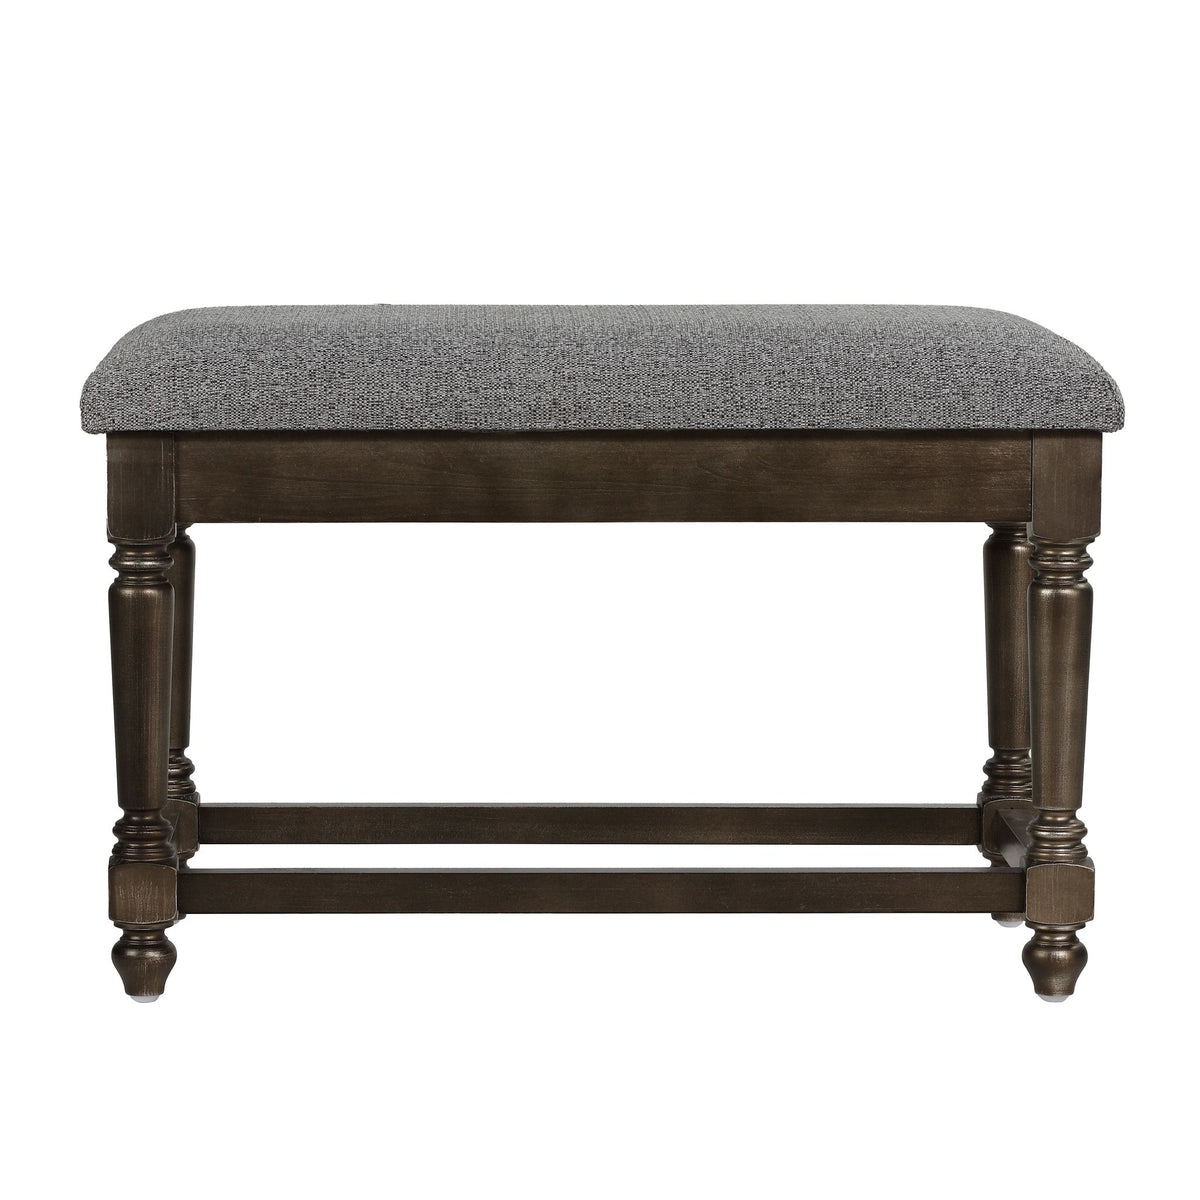 Cortesi Home Enza Bench in Bronze Brown Color with Grey Fabric Cushion